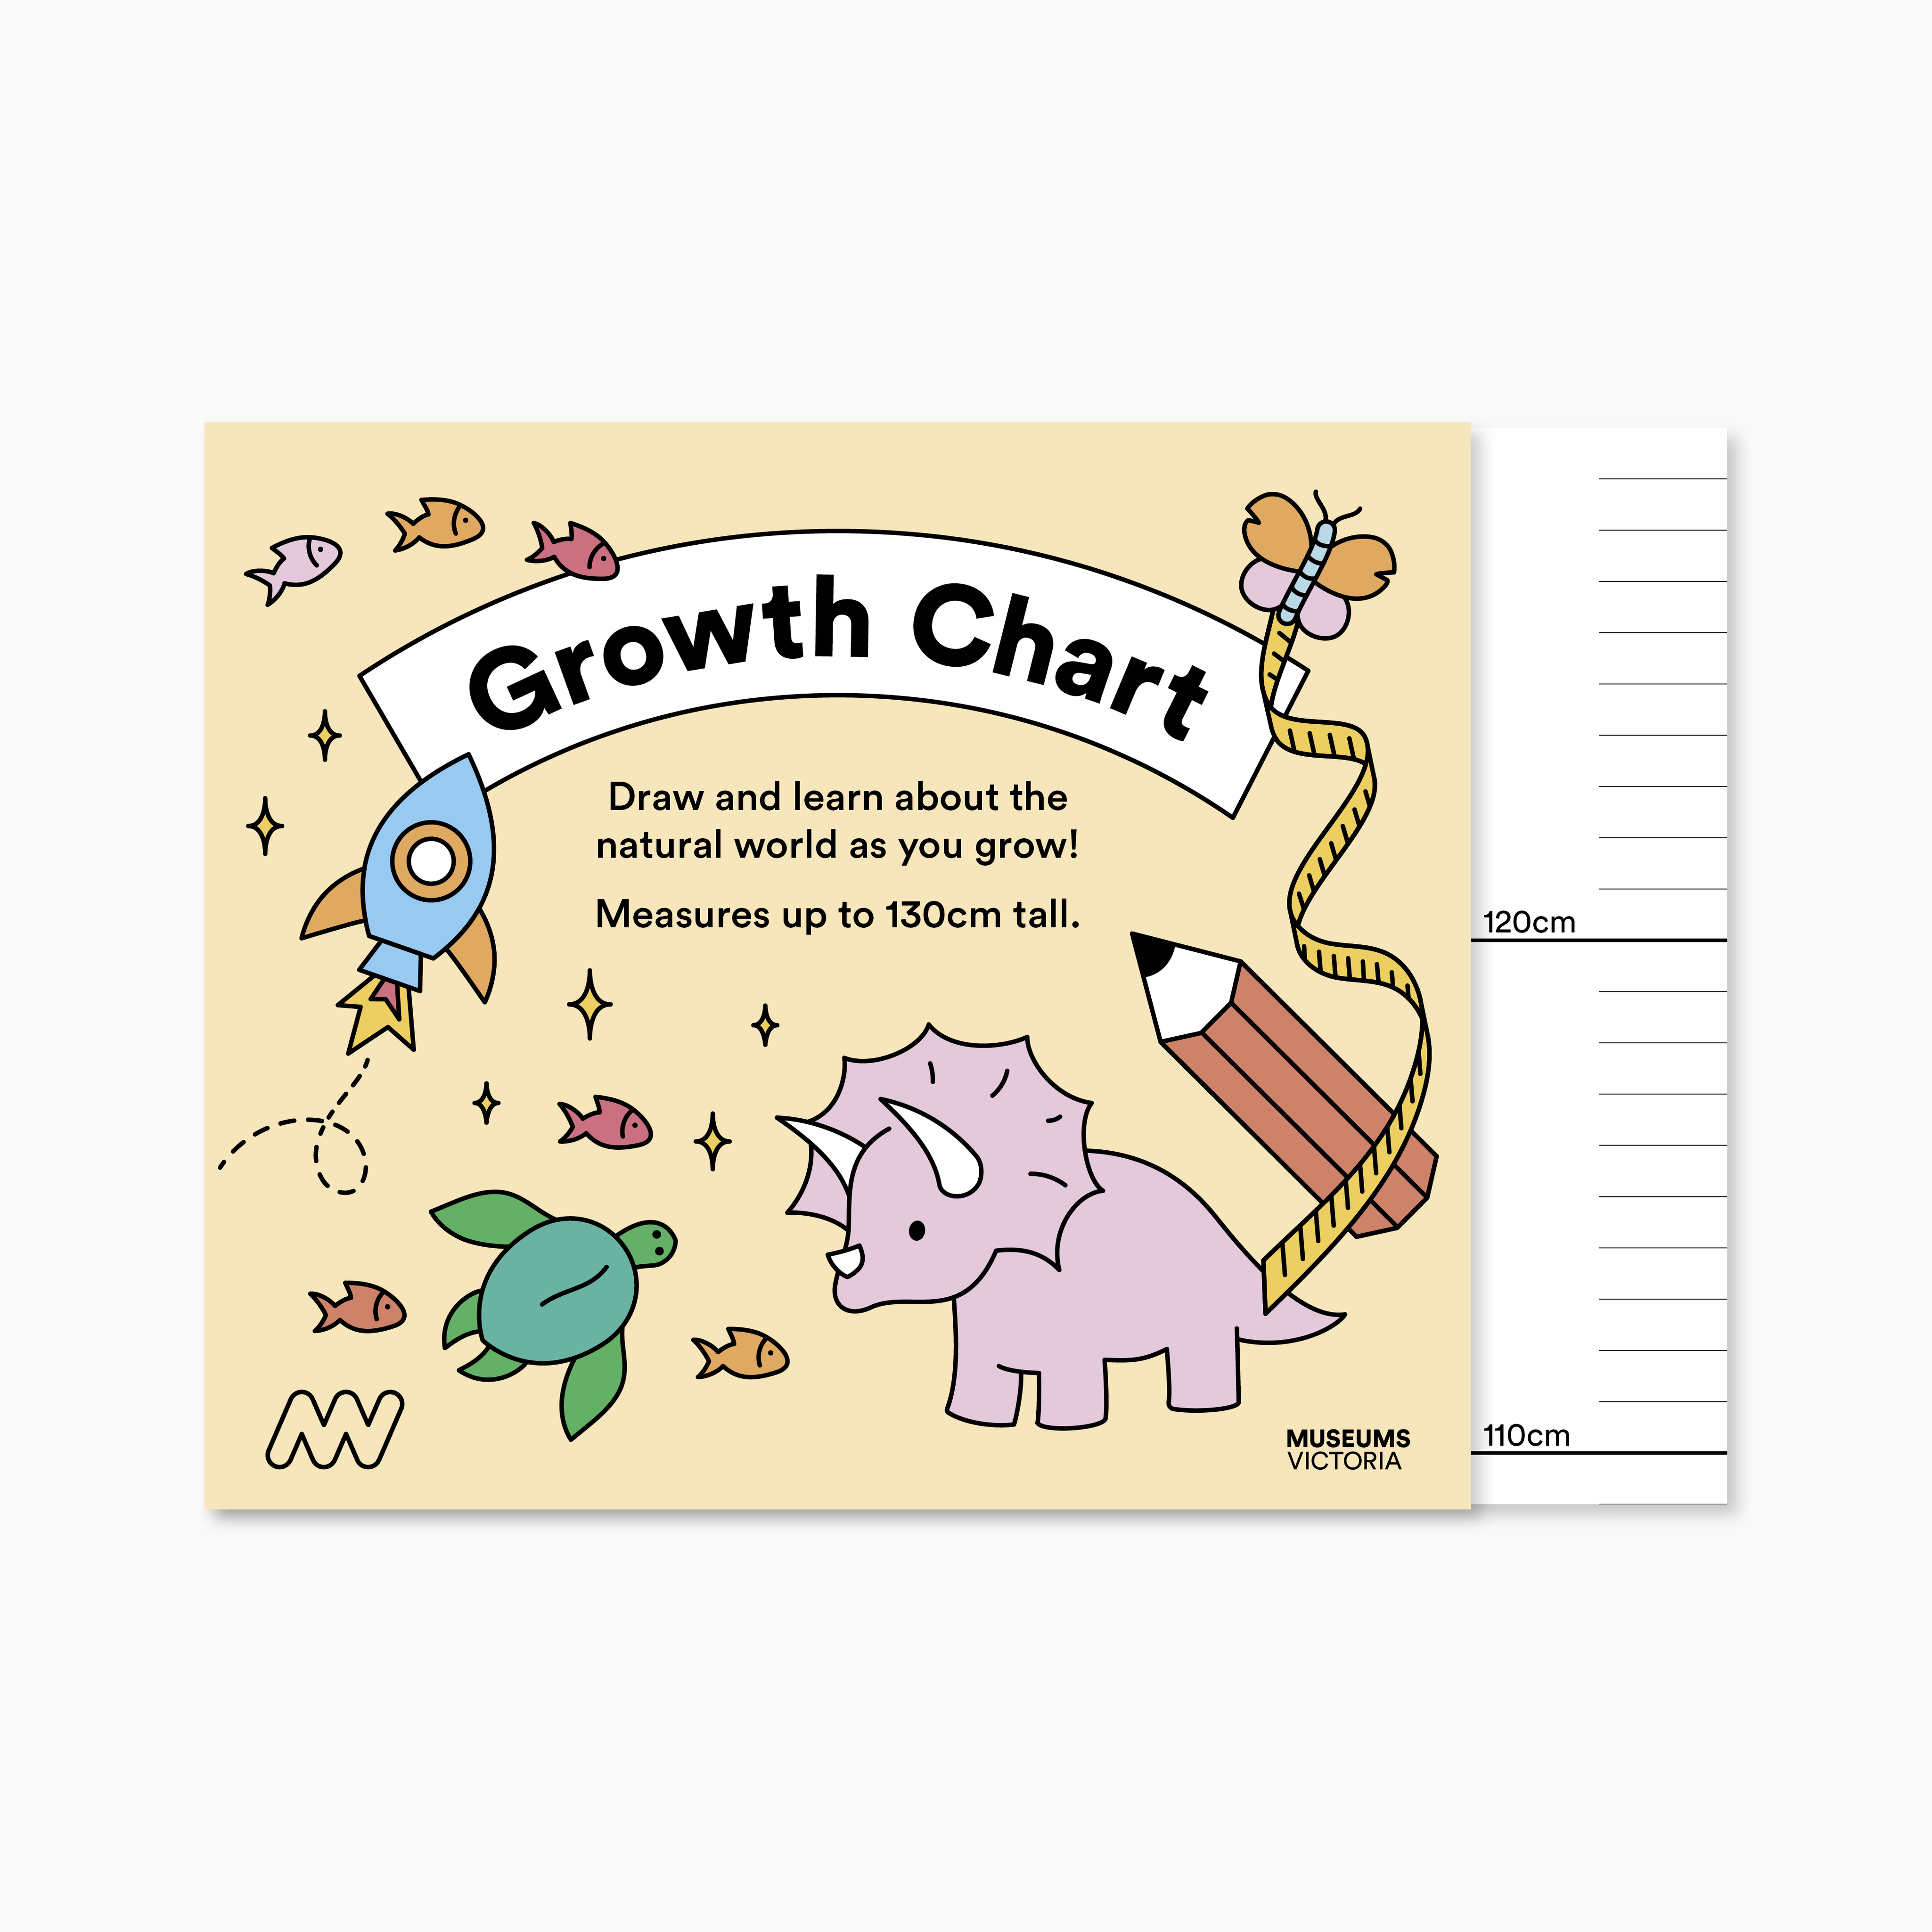 Museums Victoria Growth Chart